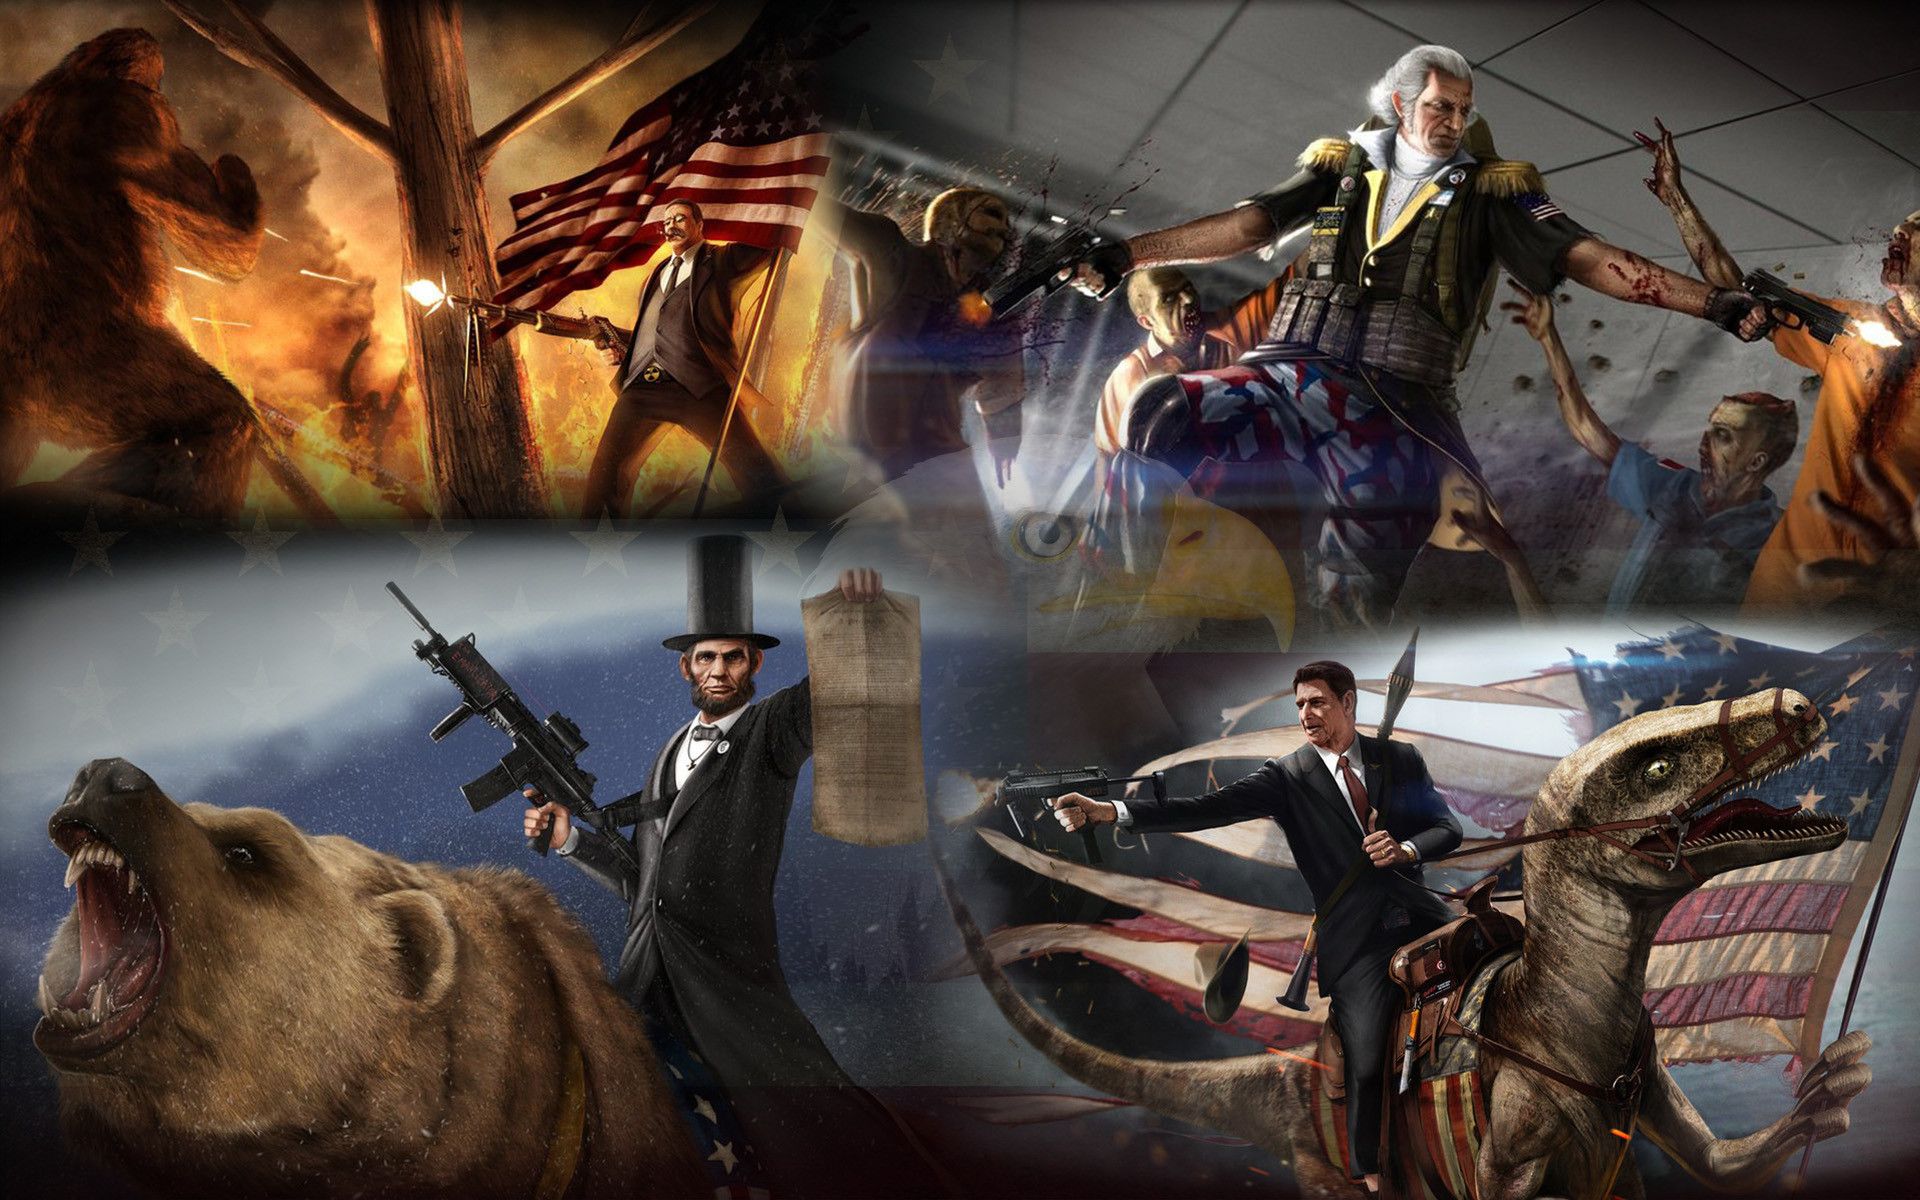 Awesome Patriotic Backgrounds